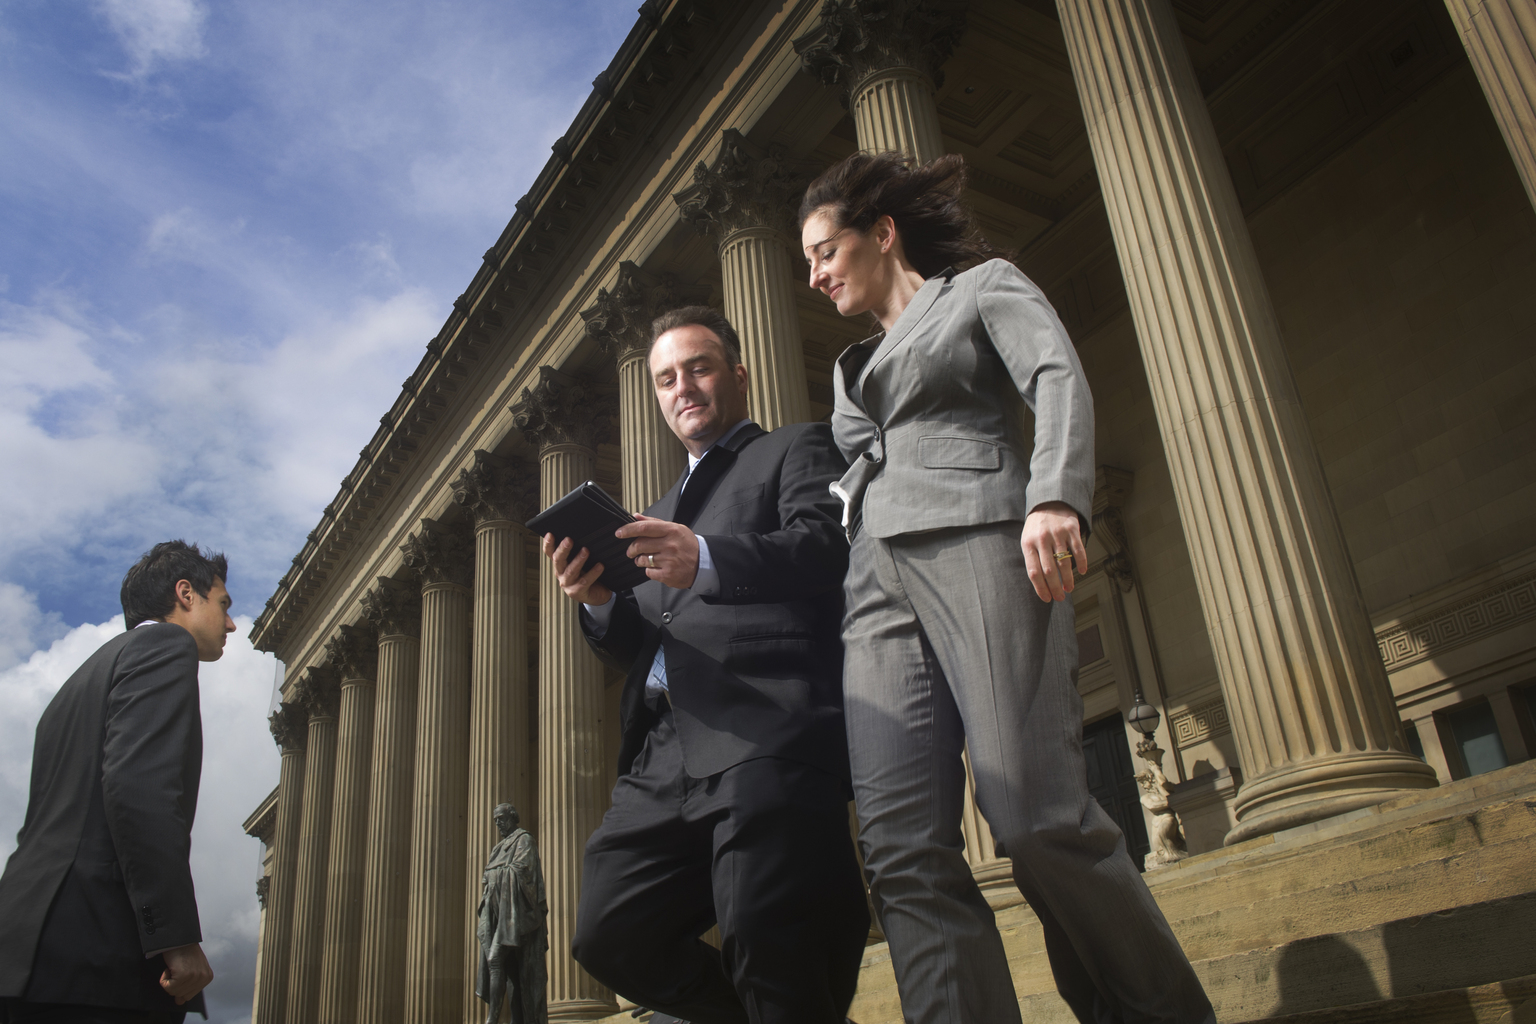 Two people in suit walking down the staircase of local government building while organizing on a tablet